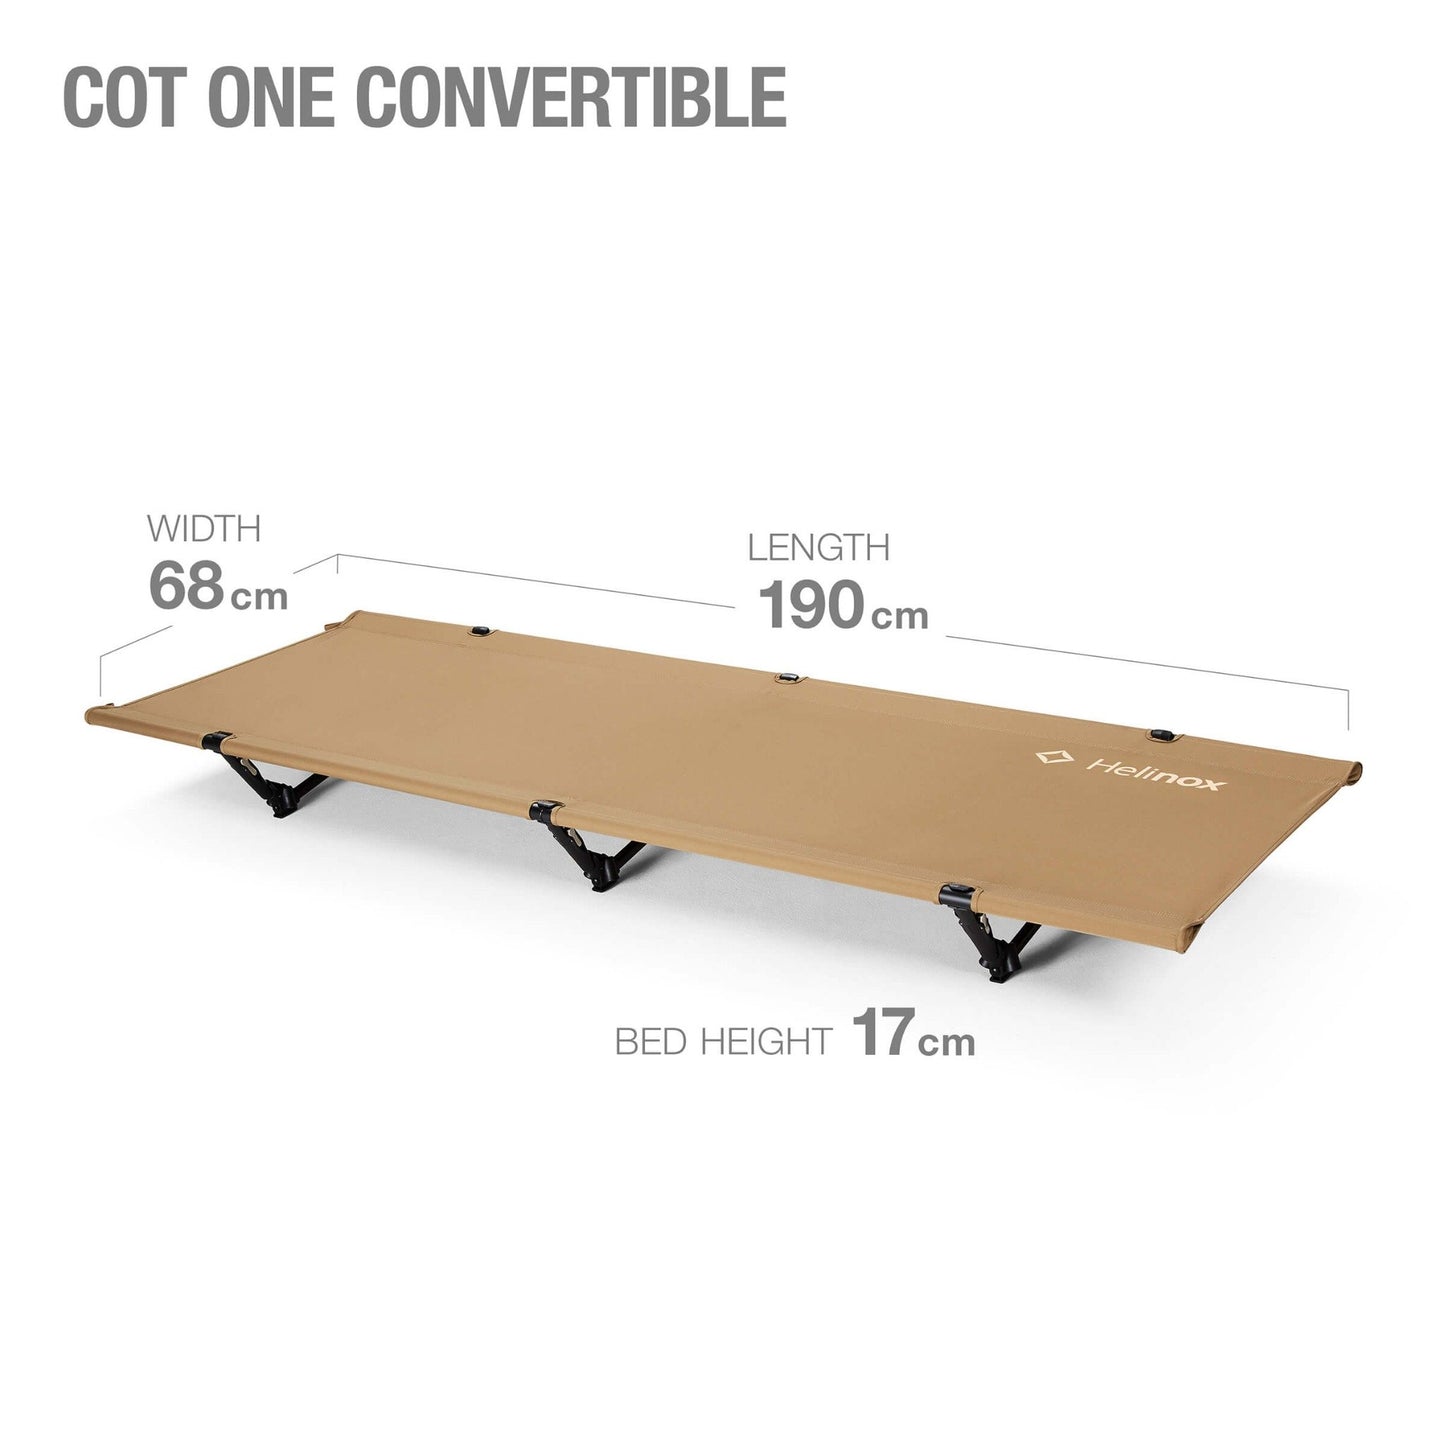 Cot One Convertible - by Helinox